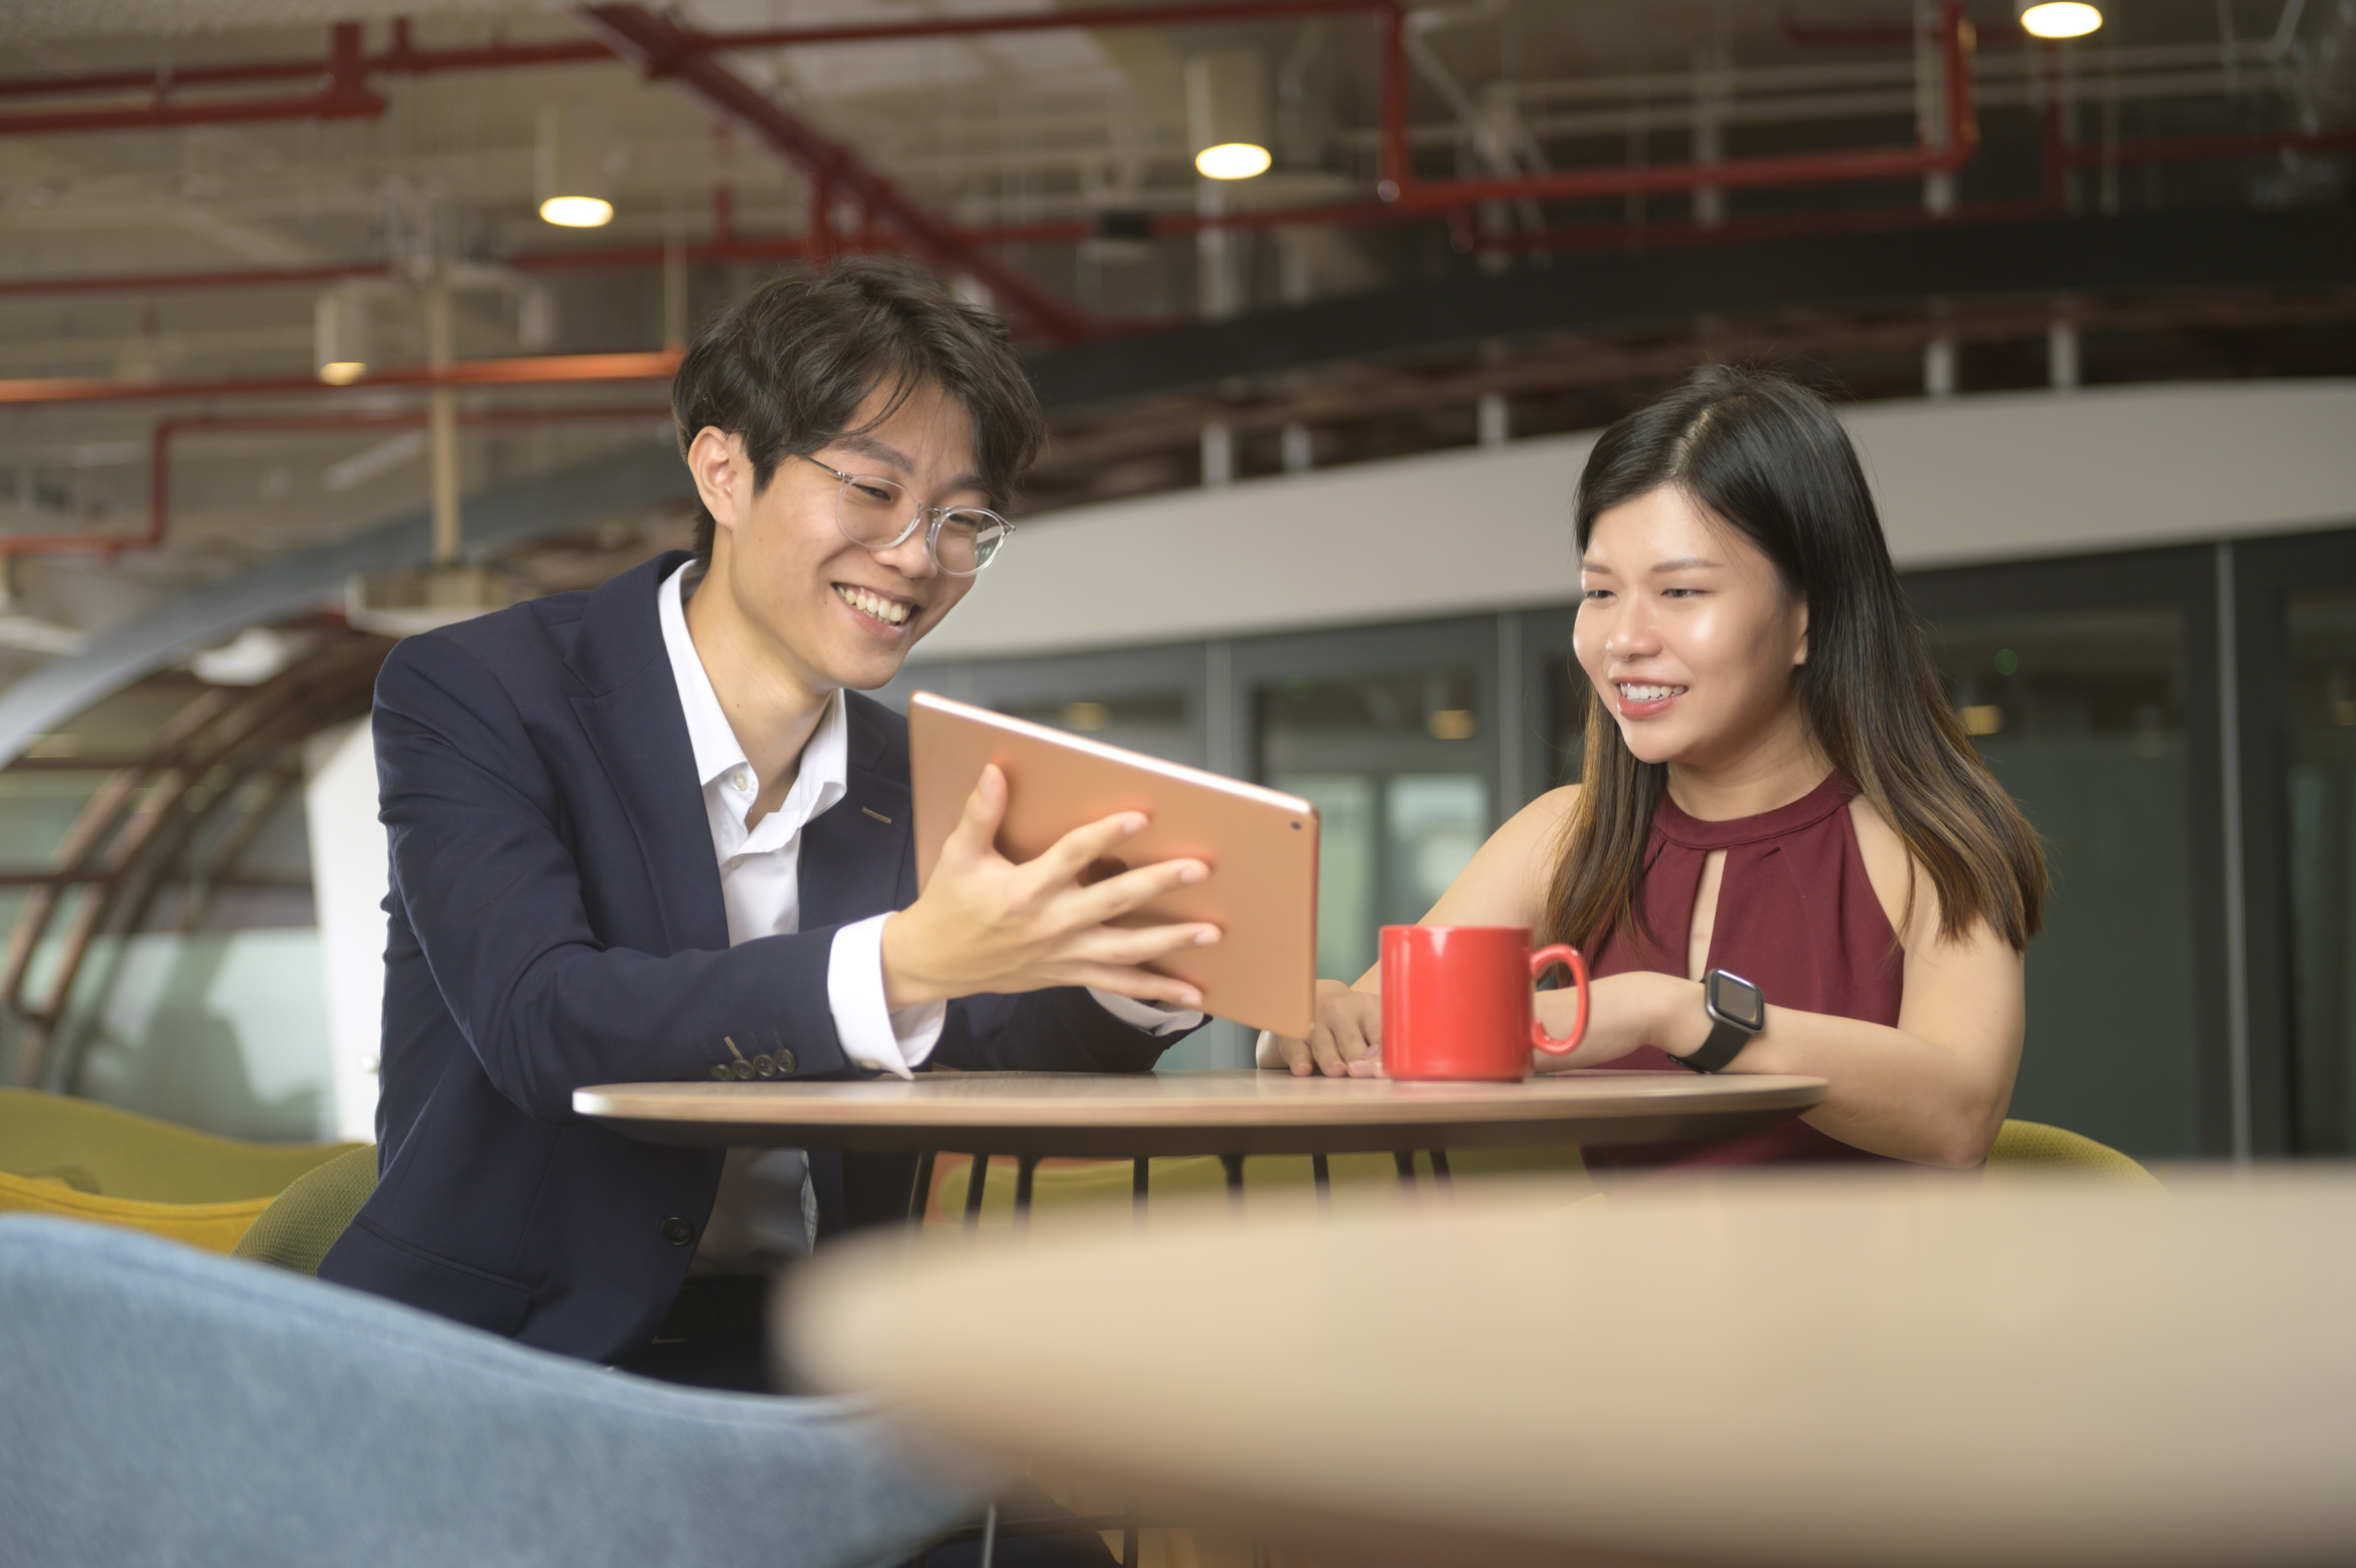 Financial representatives in Prudential’s 2024 Management Associate Programme cohort - (from left) Mr Tang Jia Hao, 25, a Wealth Manager with Prudential Financial Advisers (PFA) and Ms Charmaine Siow, 30, a Financial Consultant with Prudential Singapore.